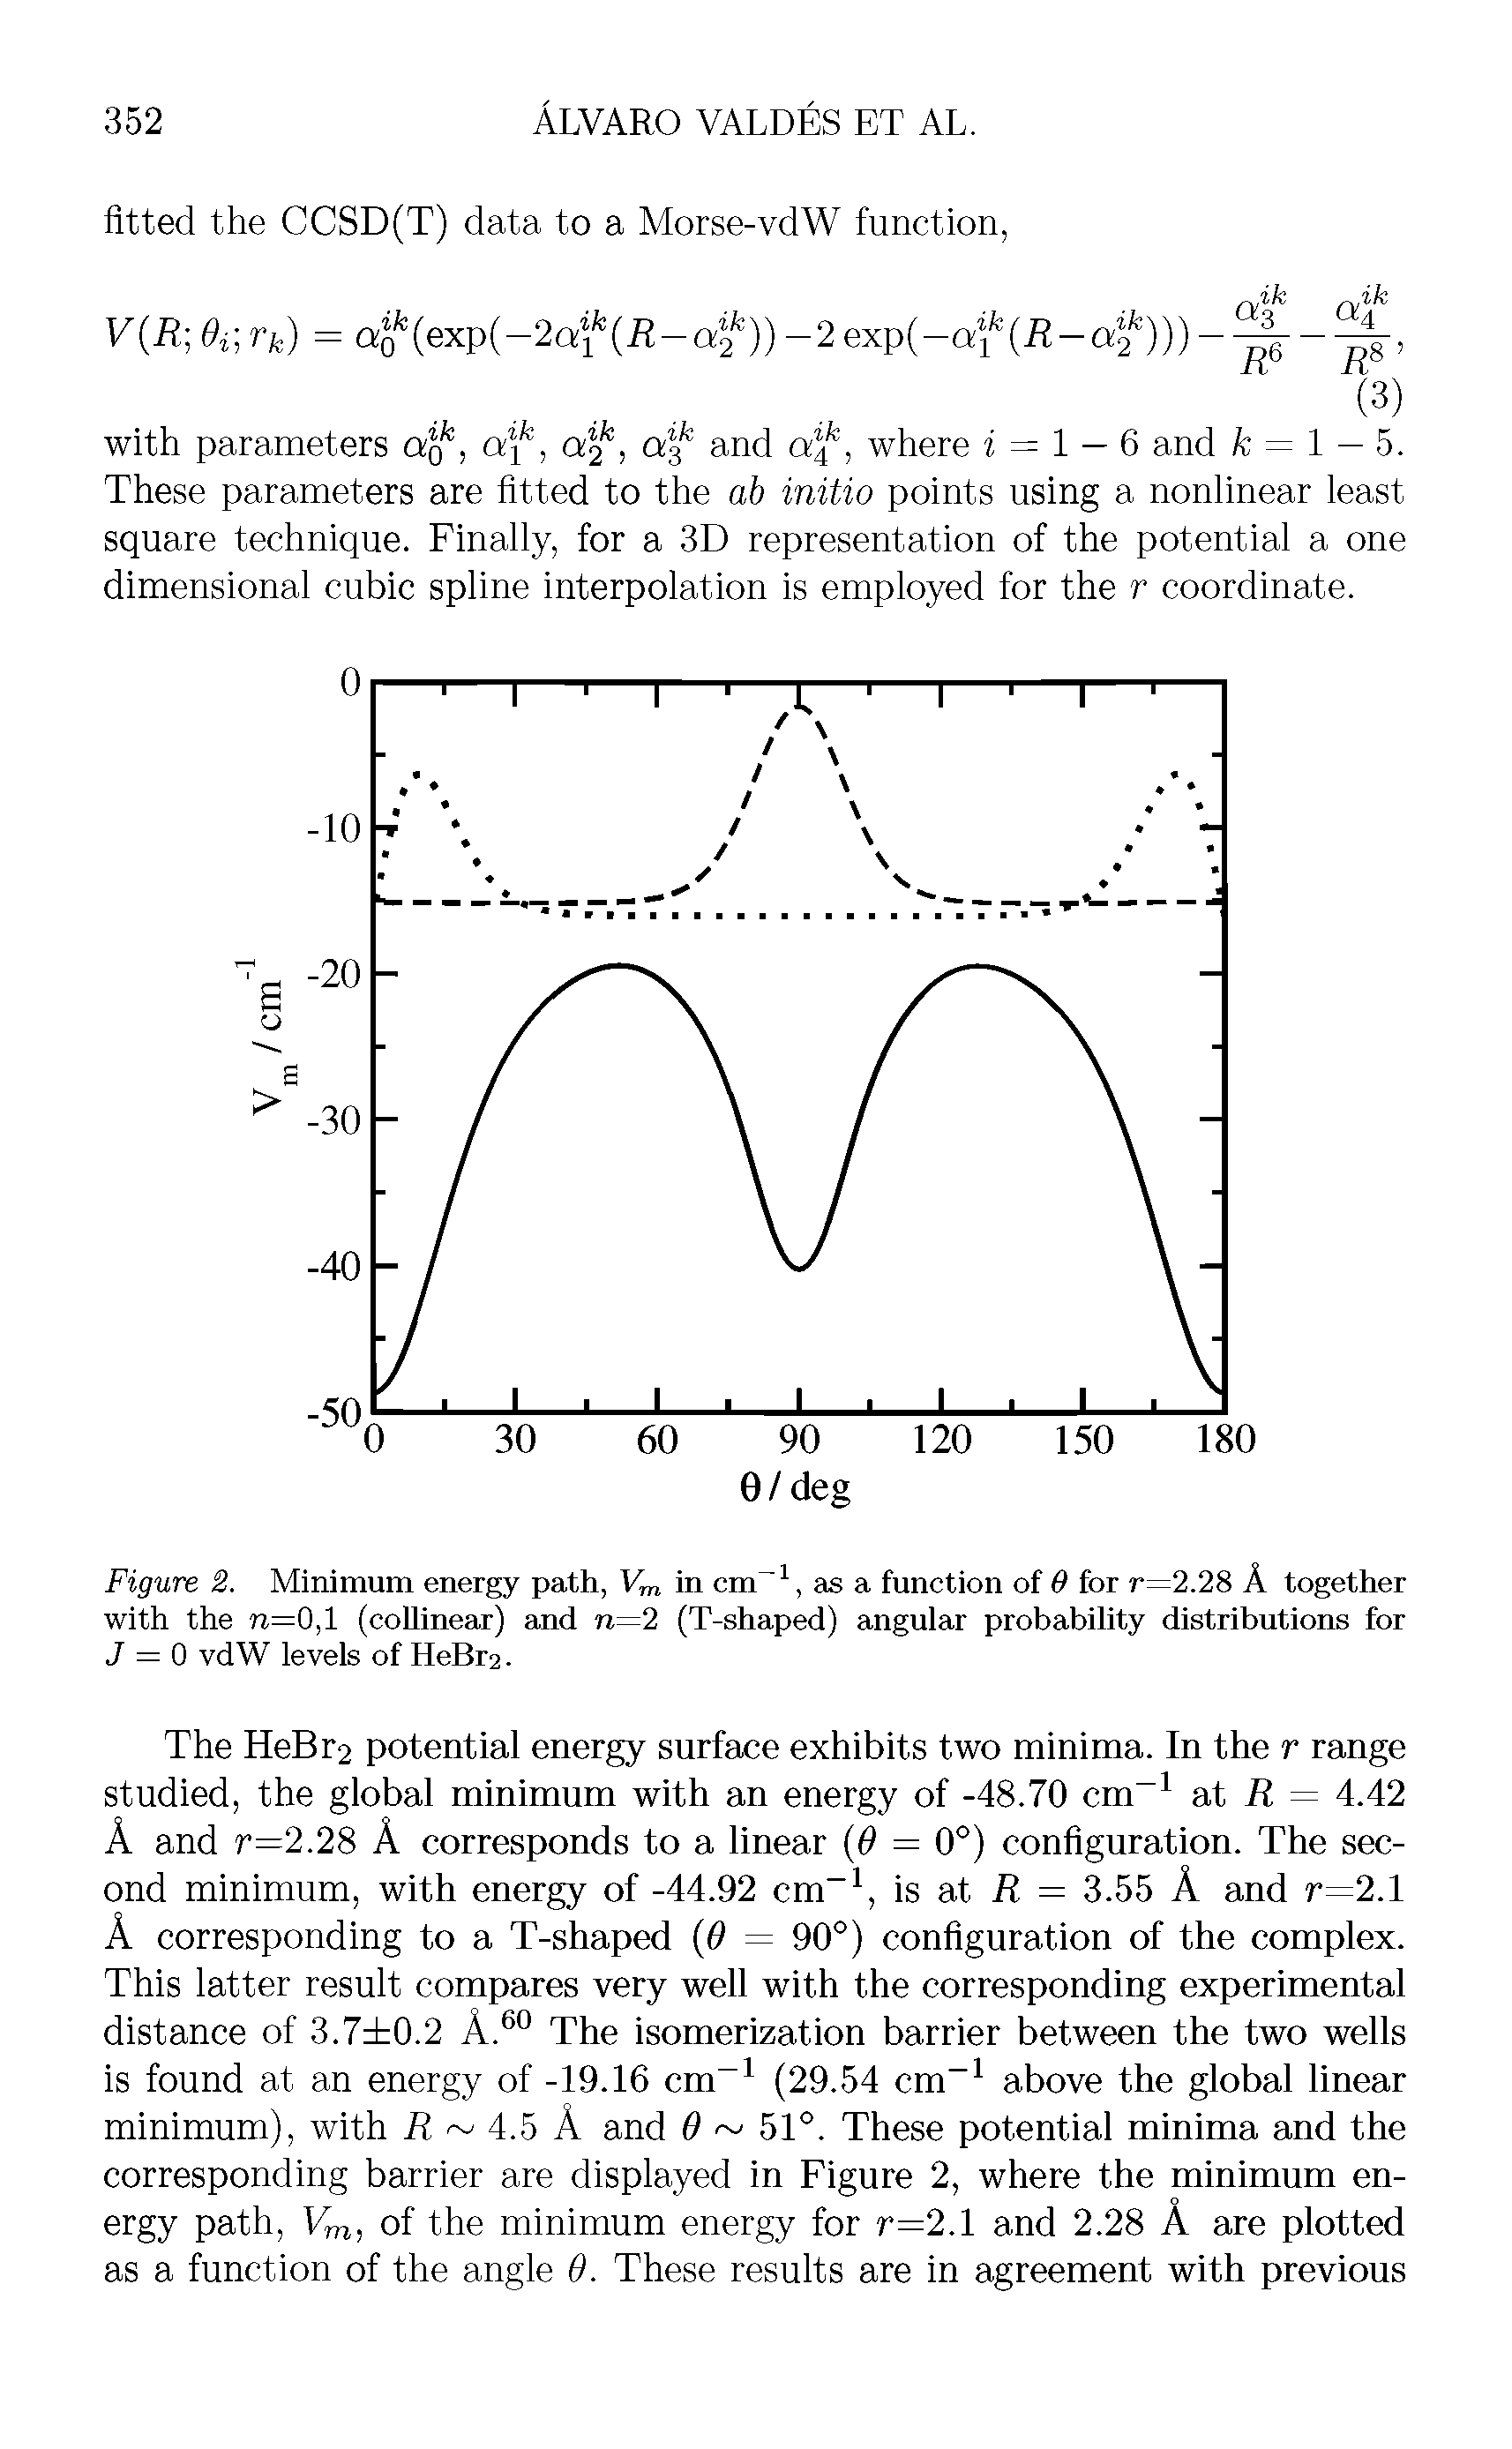 Figure 2. Minimum energy path, Vm in cm, as a function of 0 for r=2.28 A together with the n=0,l (coUinear) and n=2 (T-shaped) angular probability distributions for J = 0 vdW levels of HeBr2.